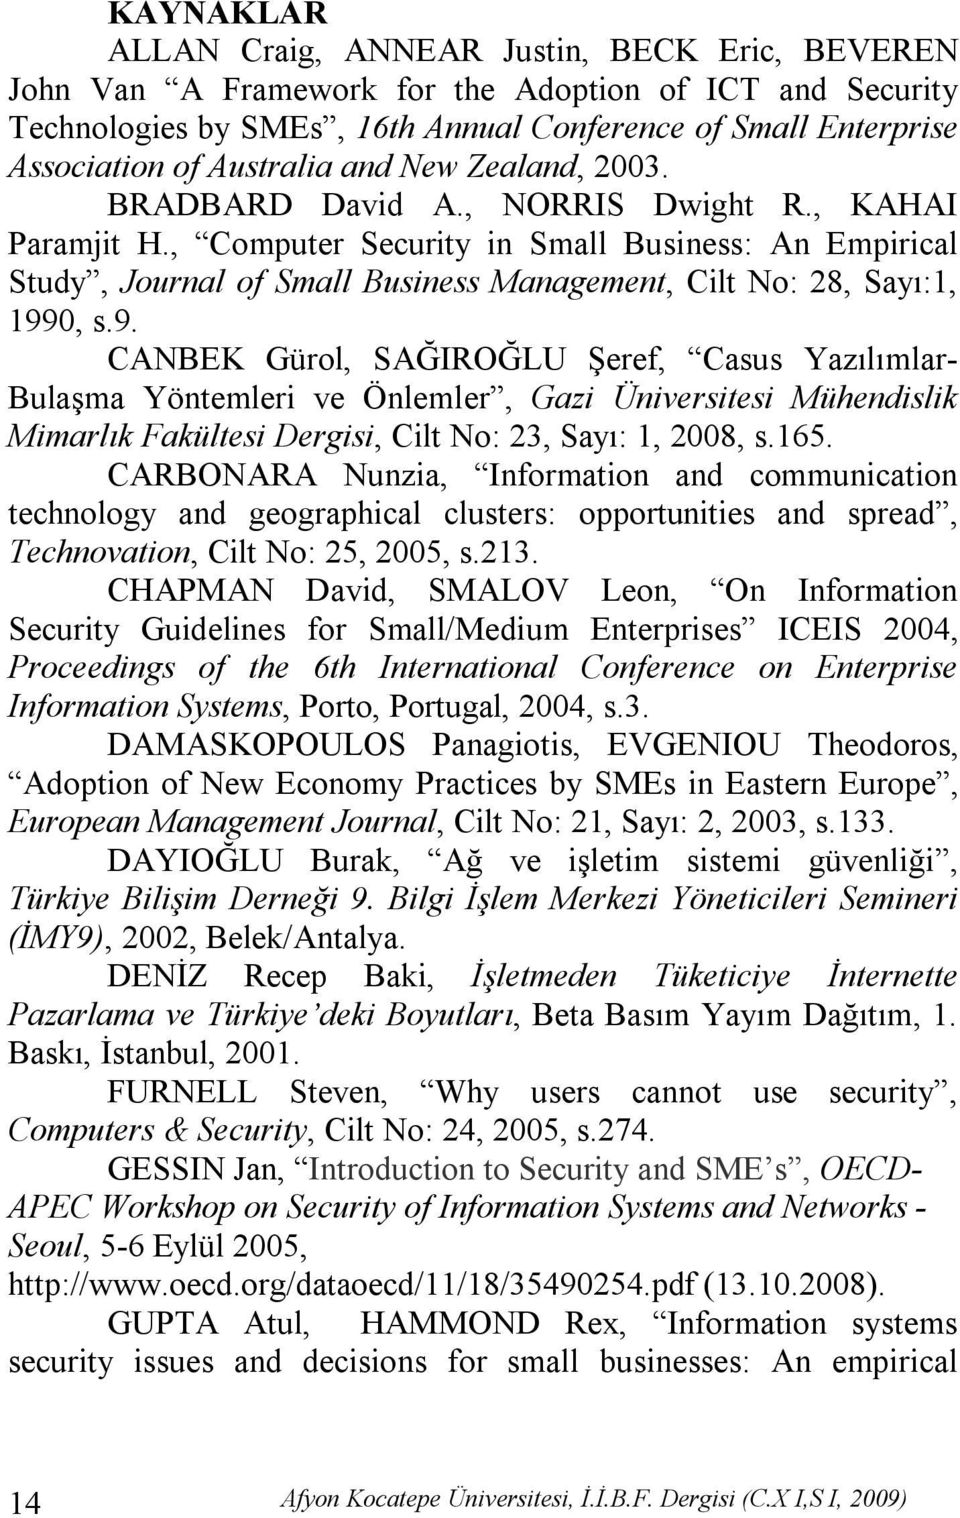 , Computer Security in Small Business: An Empirical Study, Journal of Small Business Management, Cilt No: 28, Sayı:1, 199